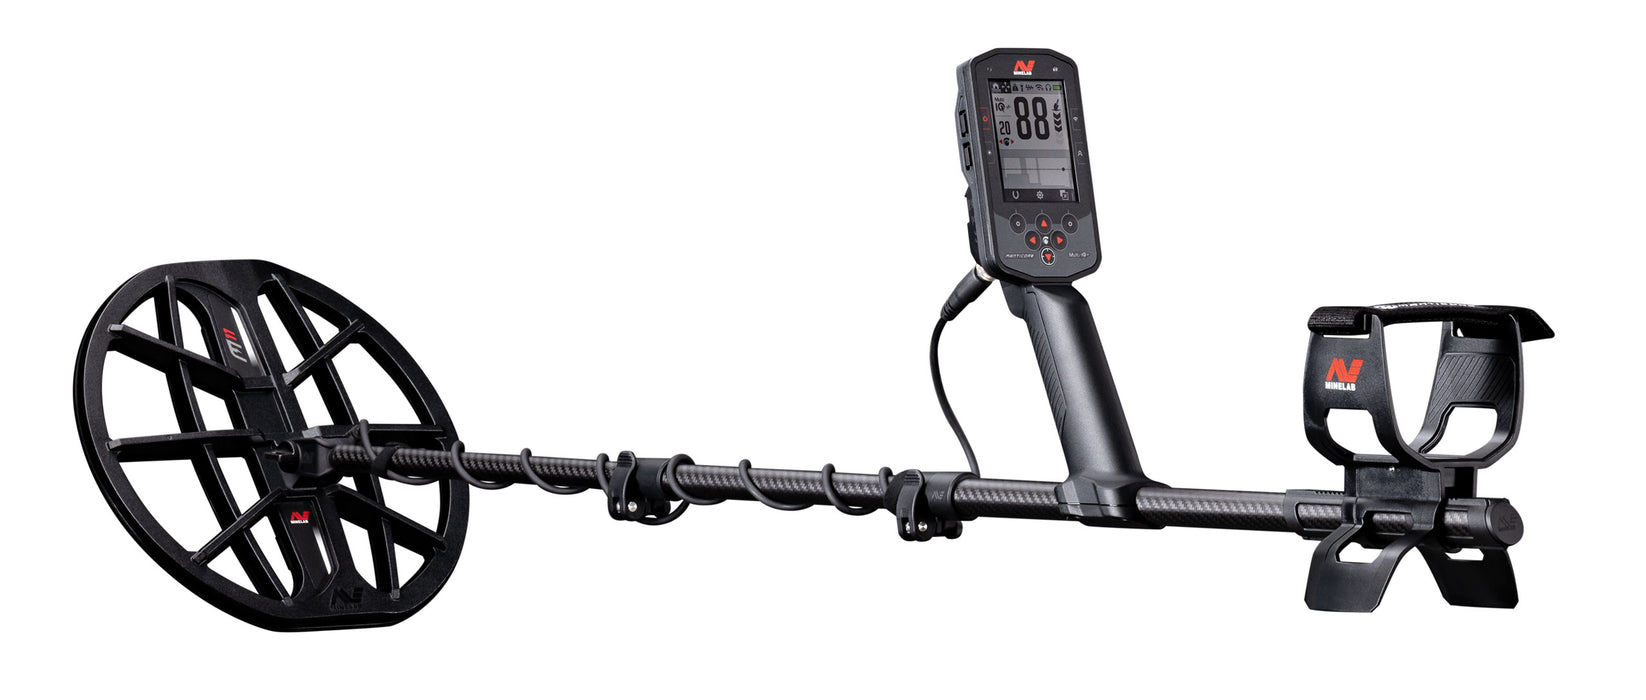 Minelab Manticore Metal Detector With Pro Find 40 PinPointer